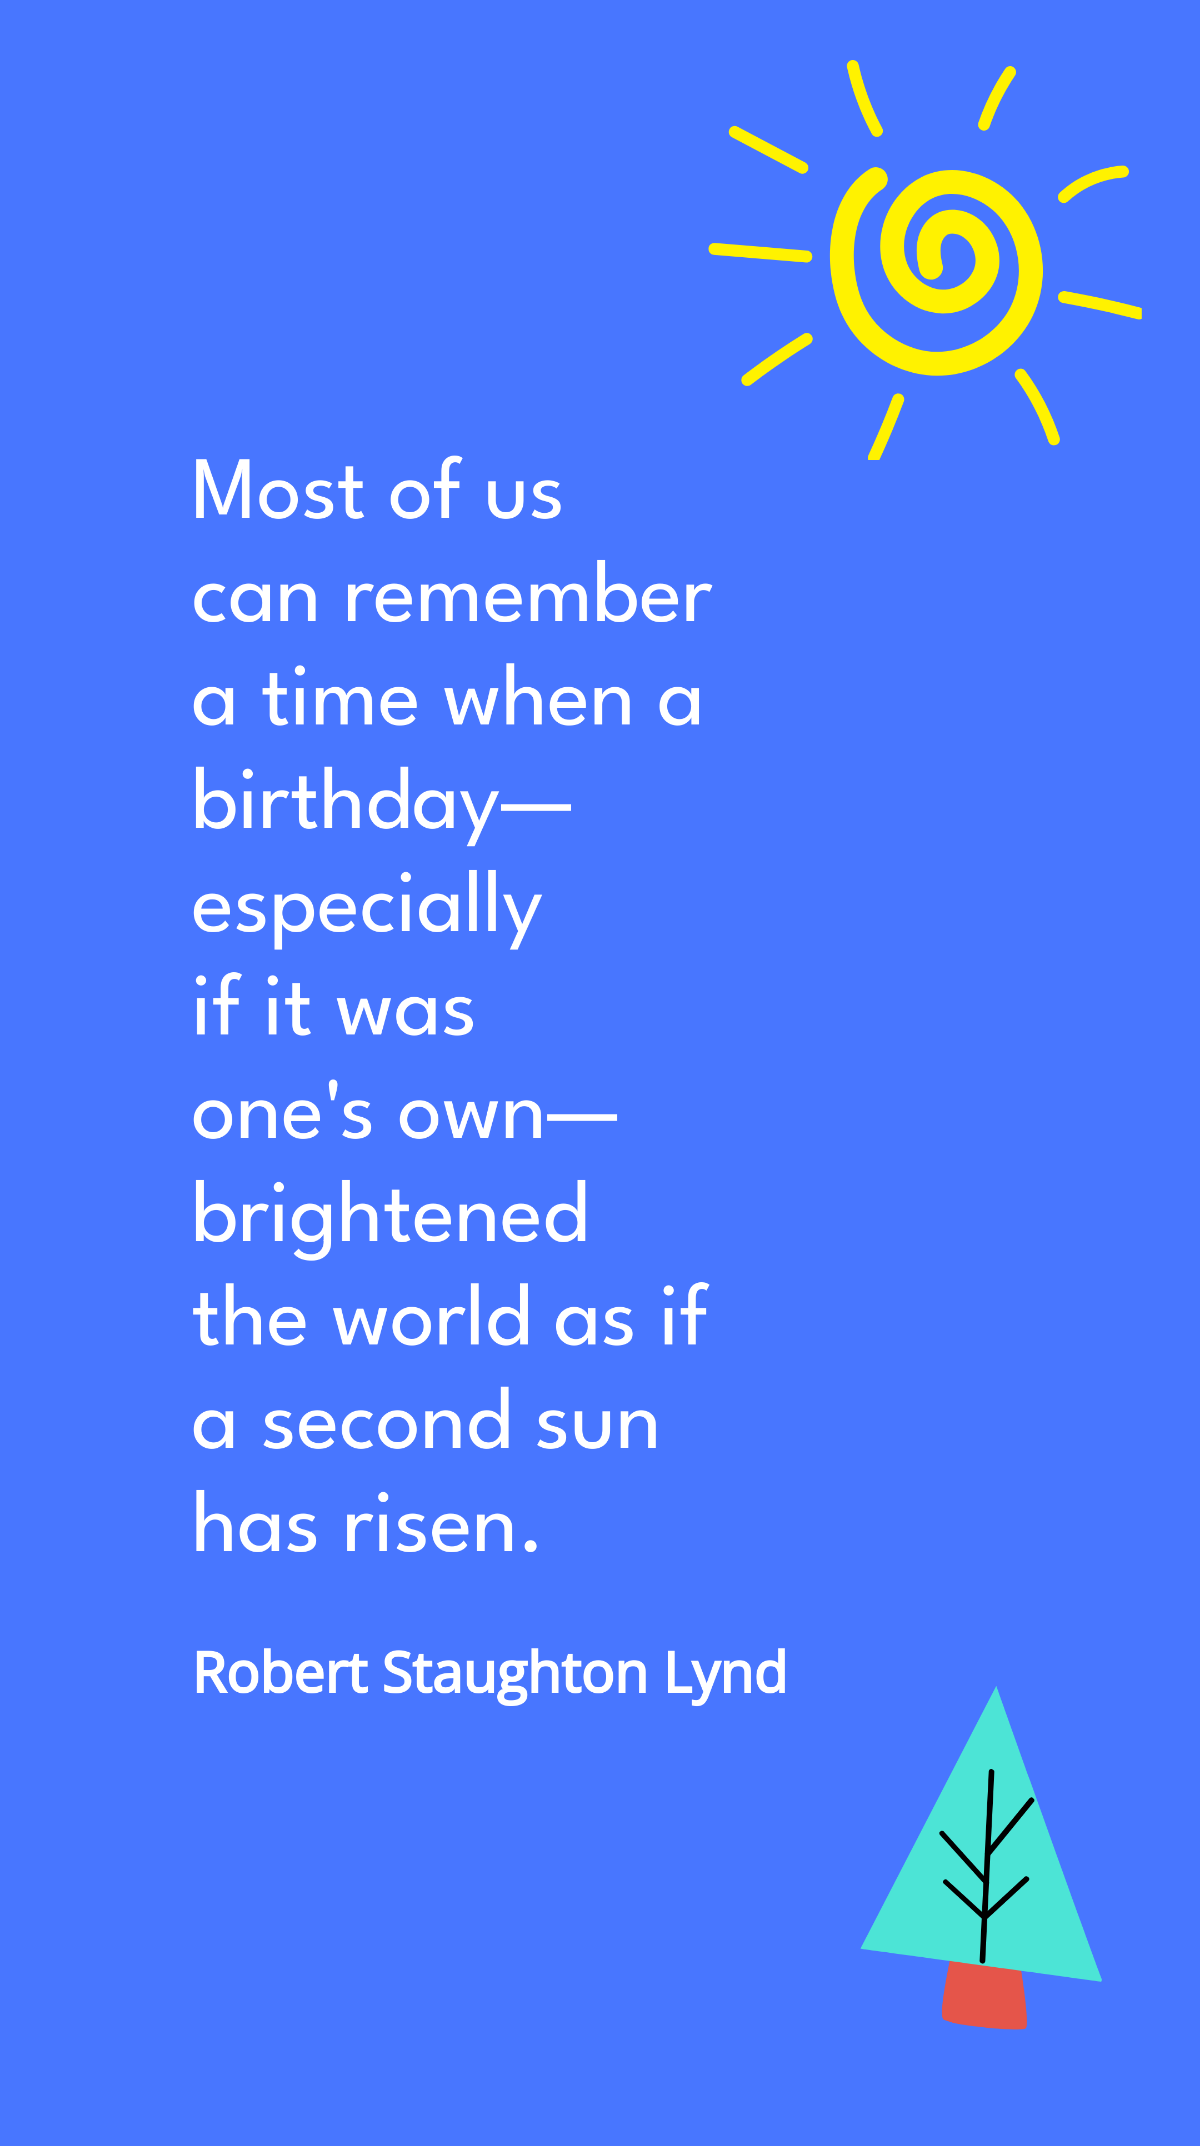 Robert Staughton Lynd - Most of us can remember a time when a birthday - especially if it was one's own - brightened the world as if a second sun has risen. Template